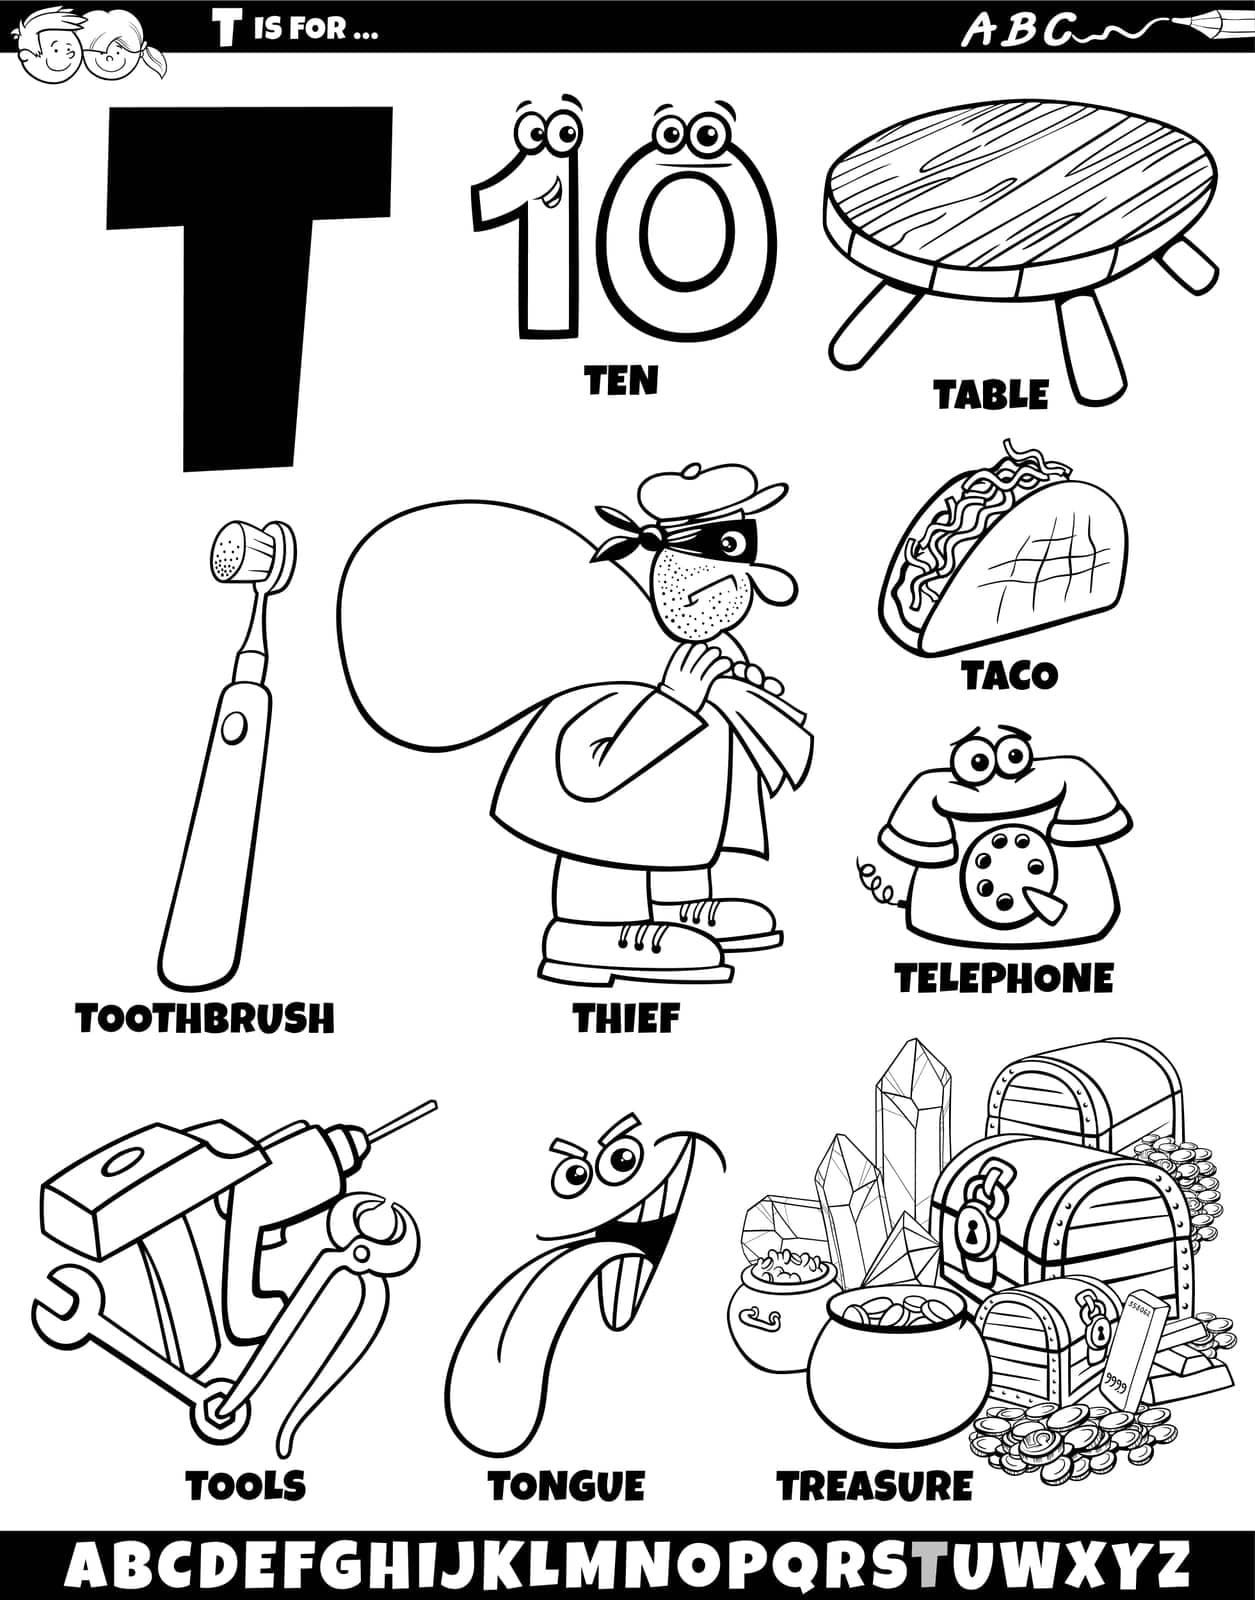 Letter T set with cartoon objects and characters coloring page by izakowski